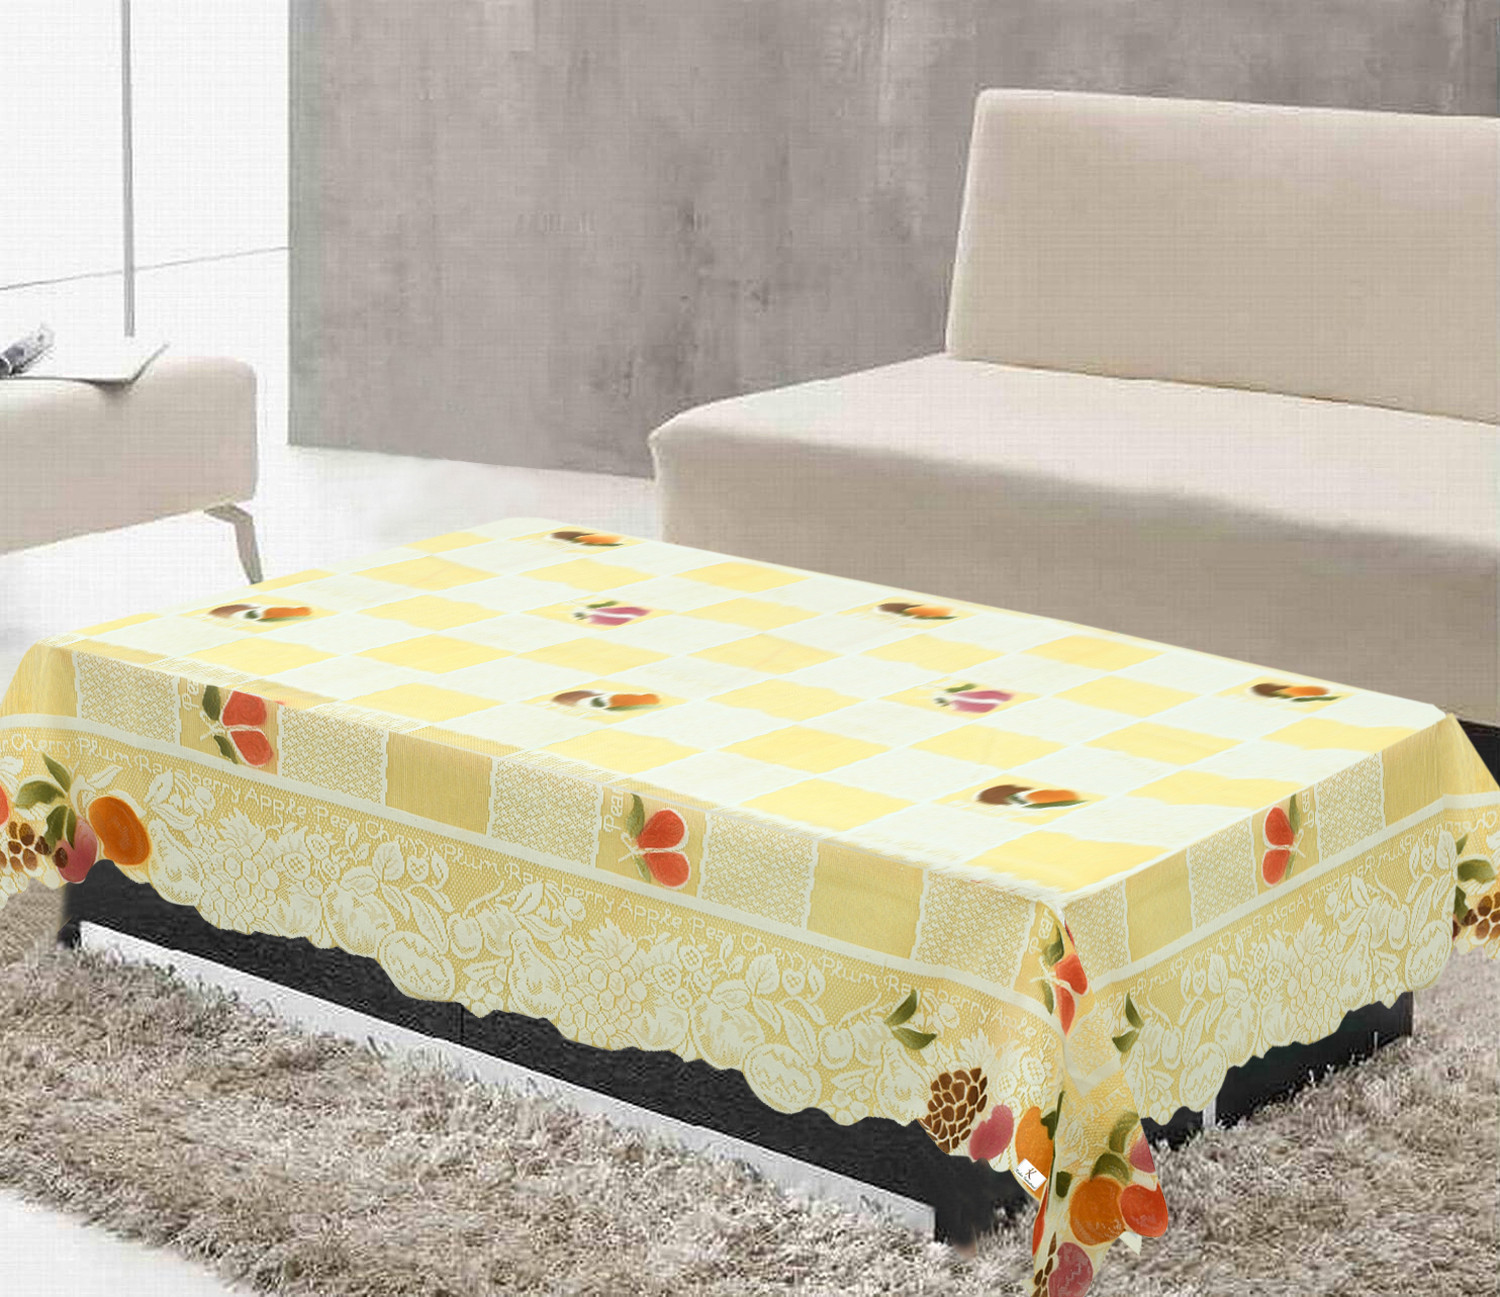 Kuber Industries Fruit Print Cotton 4 Seater Dining Table Cover,Cream-KUBMRT11607